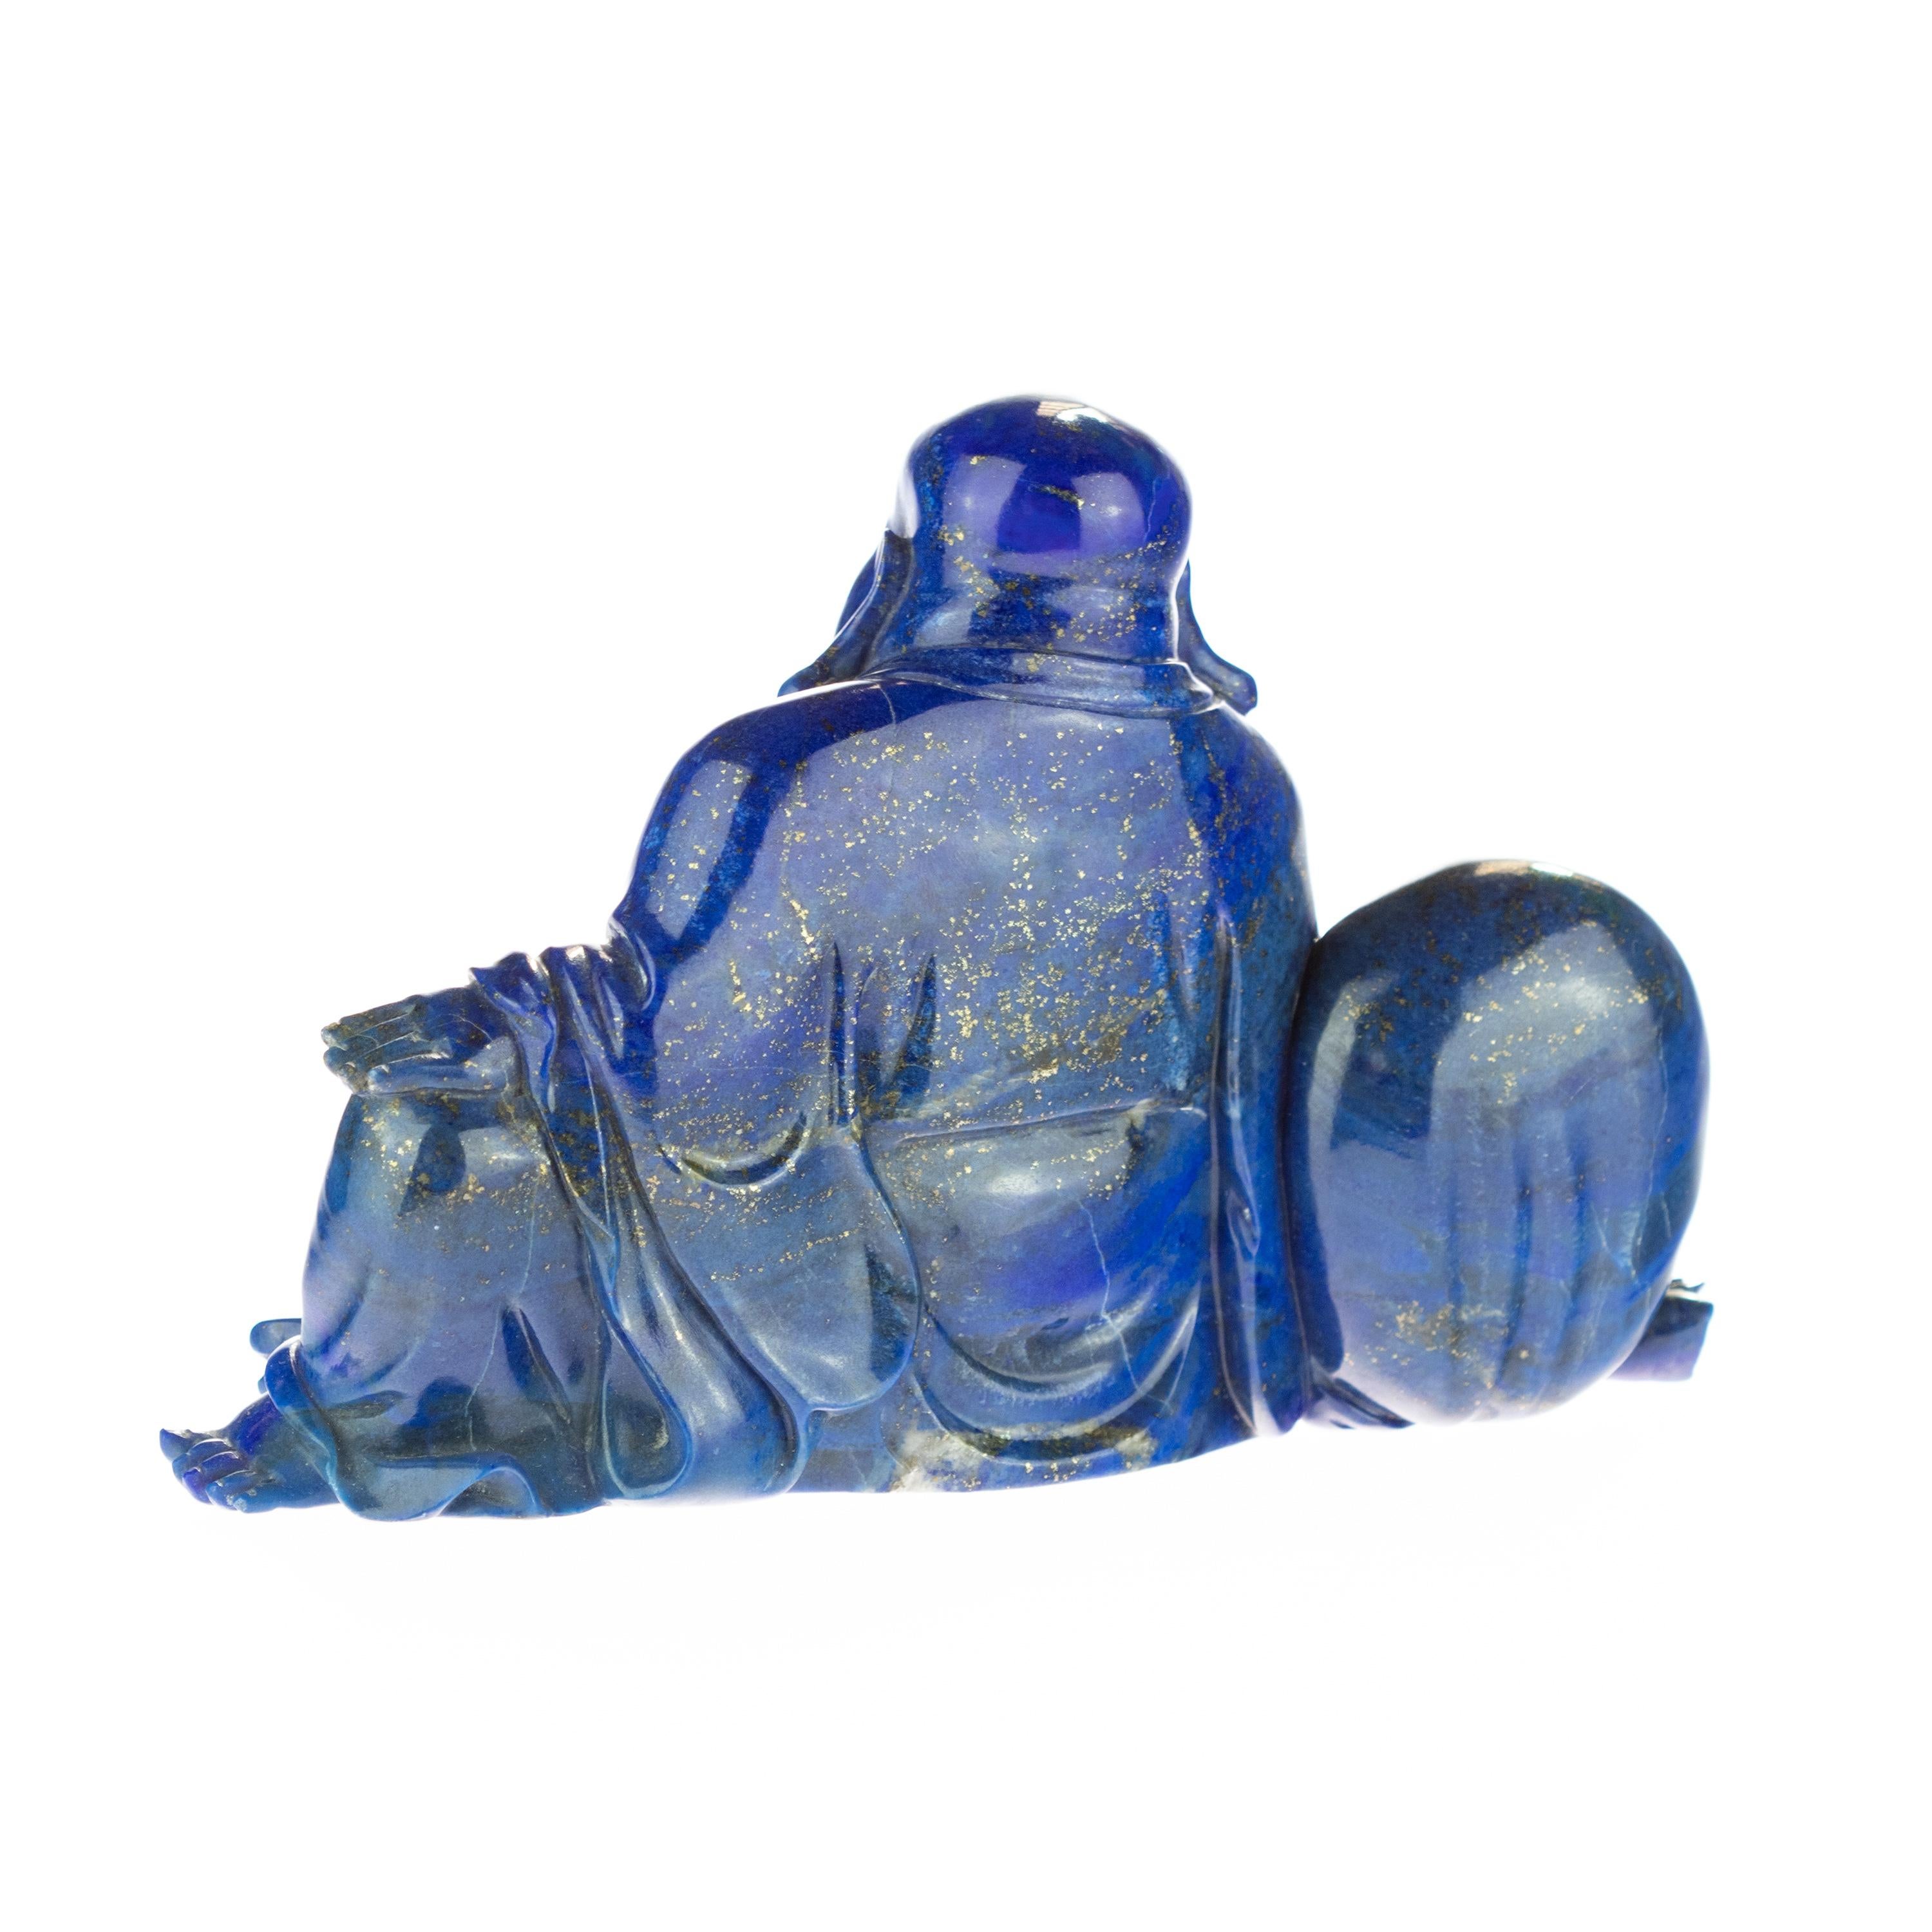 Chinese Export Lapis Lazuli Natural Laughing Buddha Carved Gemstone Asian Art Statue Sculpture For Sale